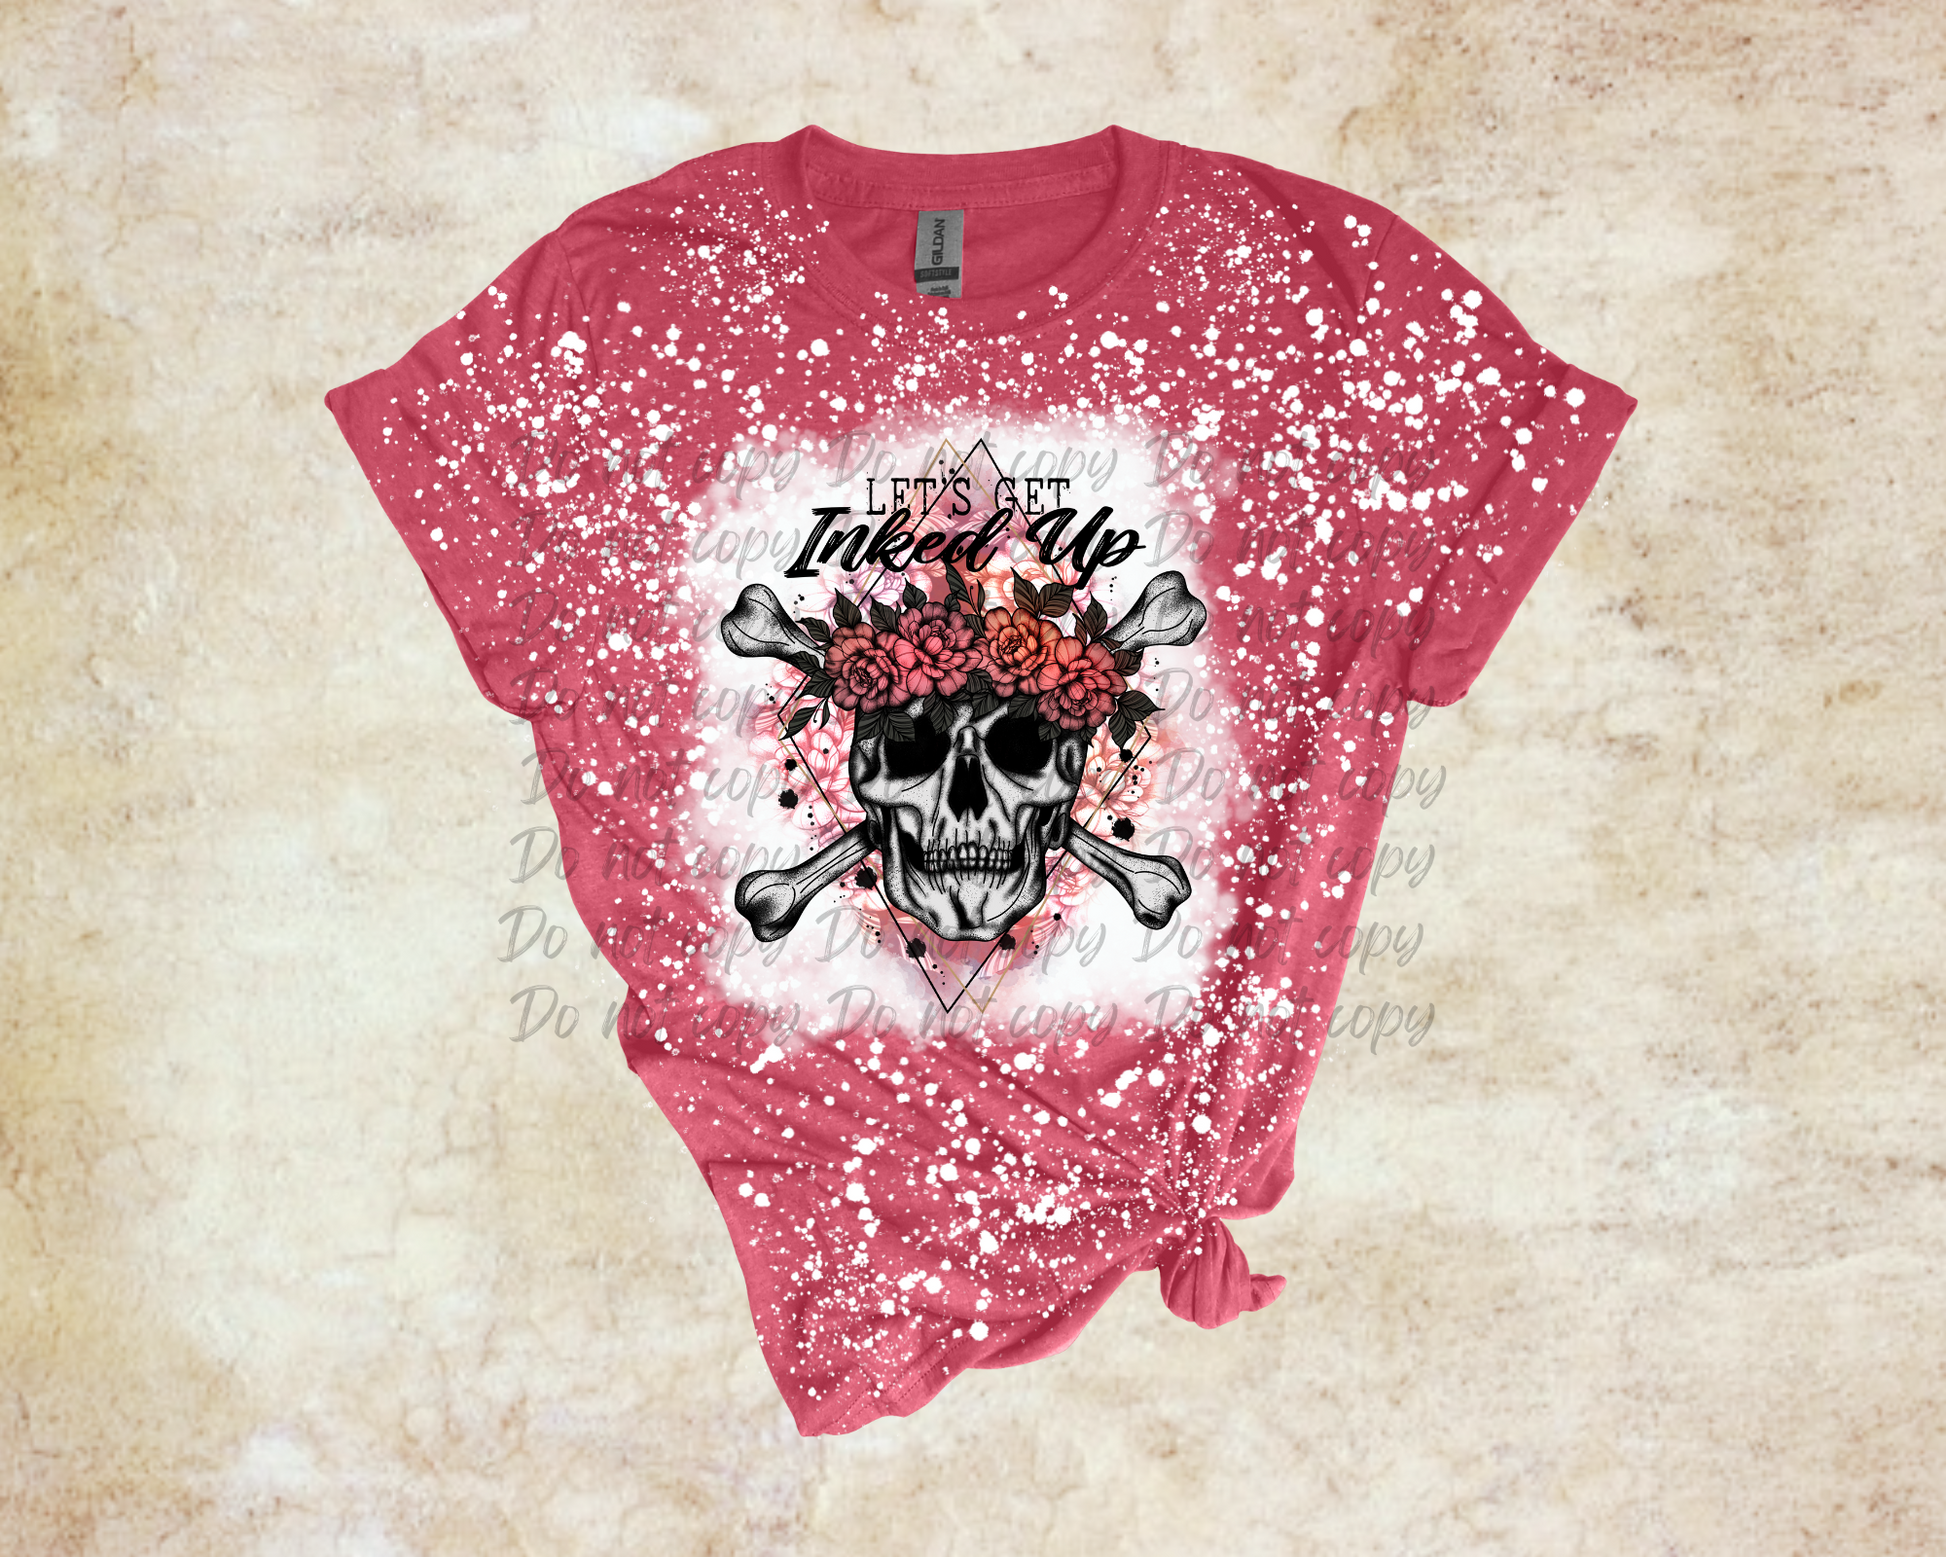 Inked bleached shirt | Let's get inked up - Mayan Sub Shop